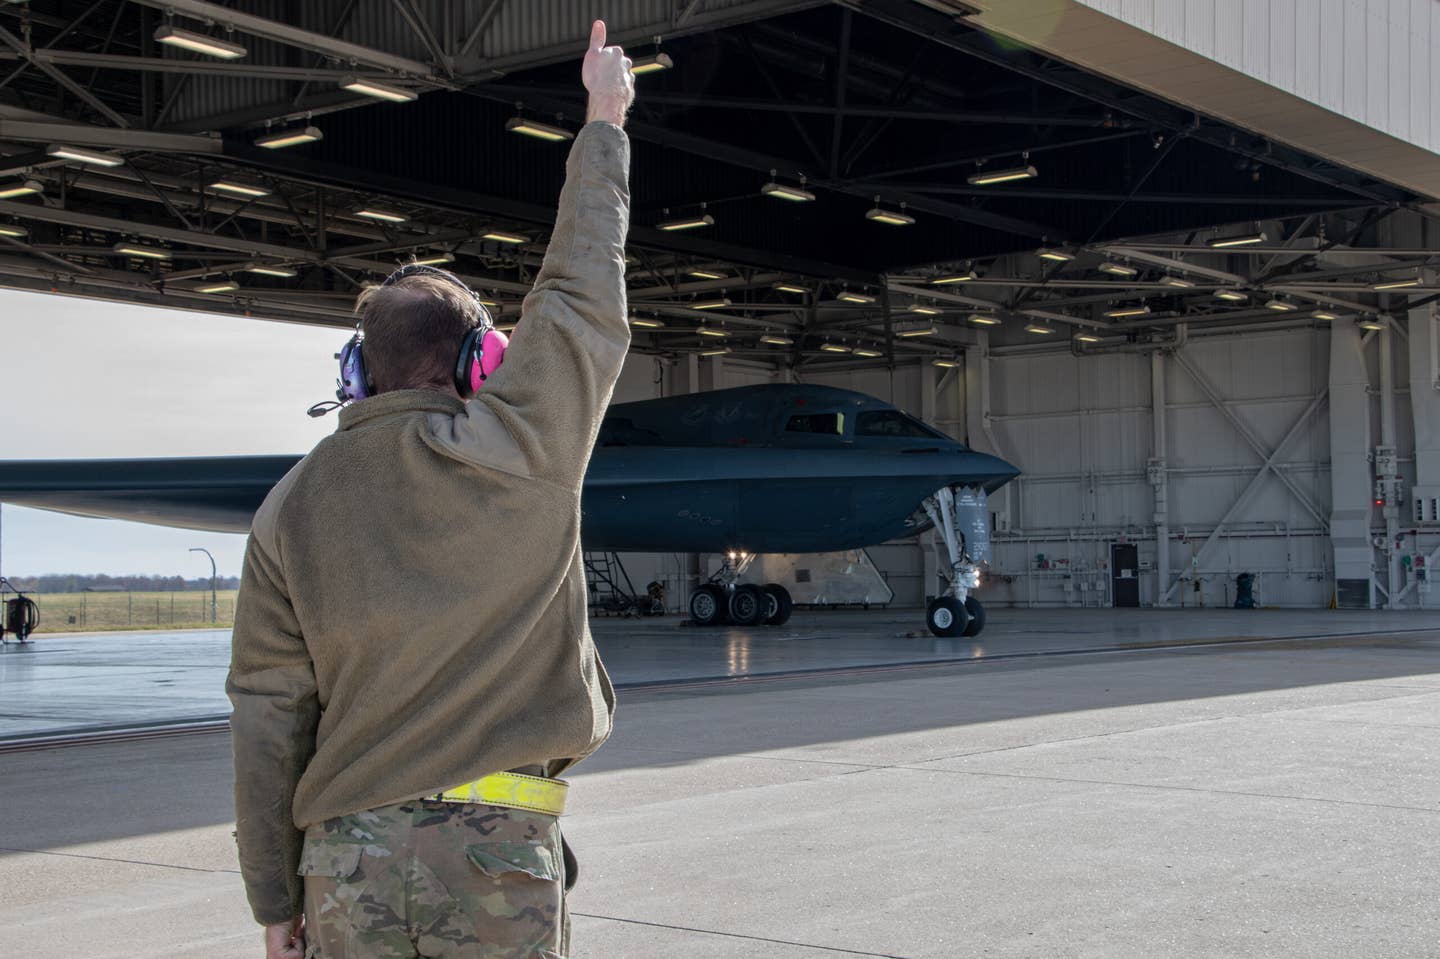 A 509th Bomb Wing maintainer marshals a B-2 stealth bomber before takeoff at Whiteman Air Force Base. <em>U.S. Air National Guard photo by Airman 1st Class Phoenix Lietch</em>